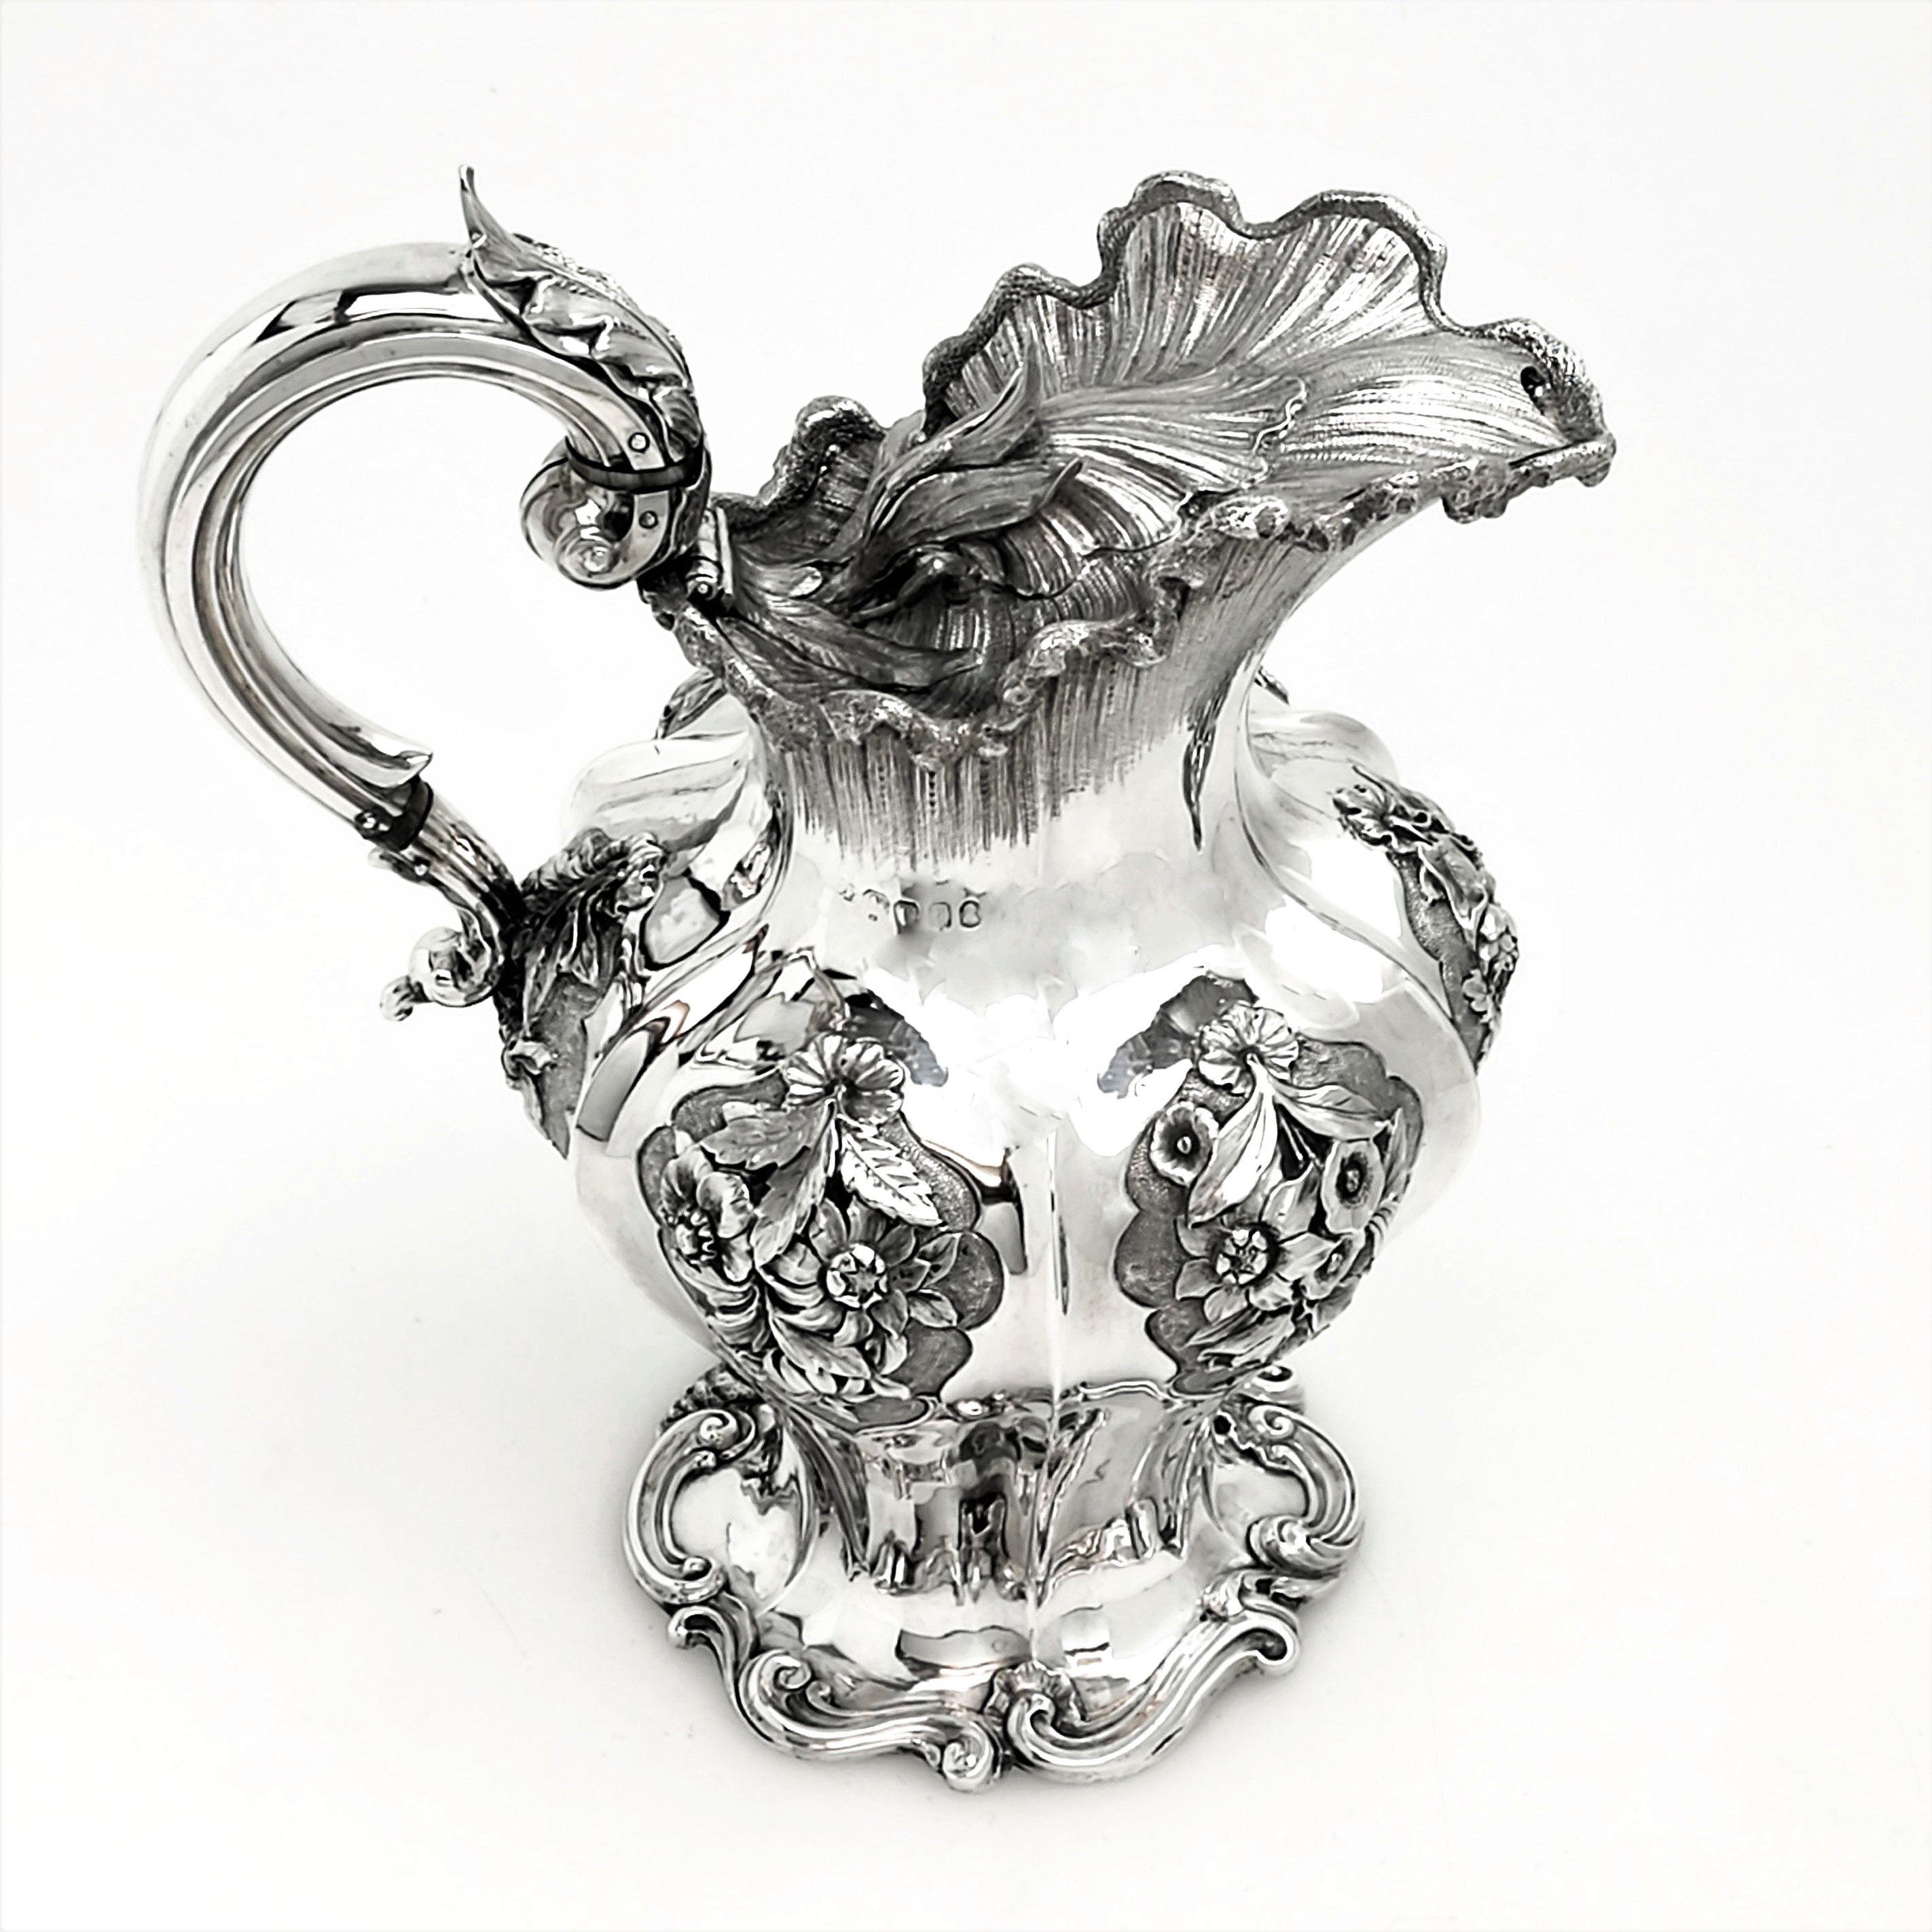 A magnificent antique William IV solid Silver Jug with an elegant shaped body. The Jug is embellished with beautiful shaped cartouches on each panel filled with chased flowers. The rim and spout of the Jug are shaped and textured, and the lid is